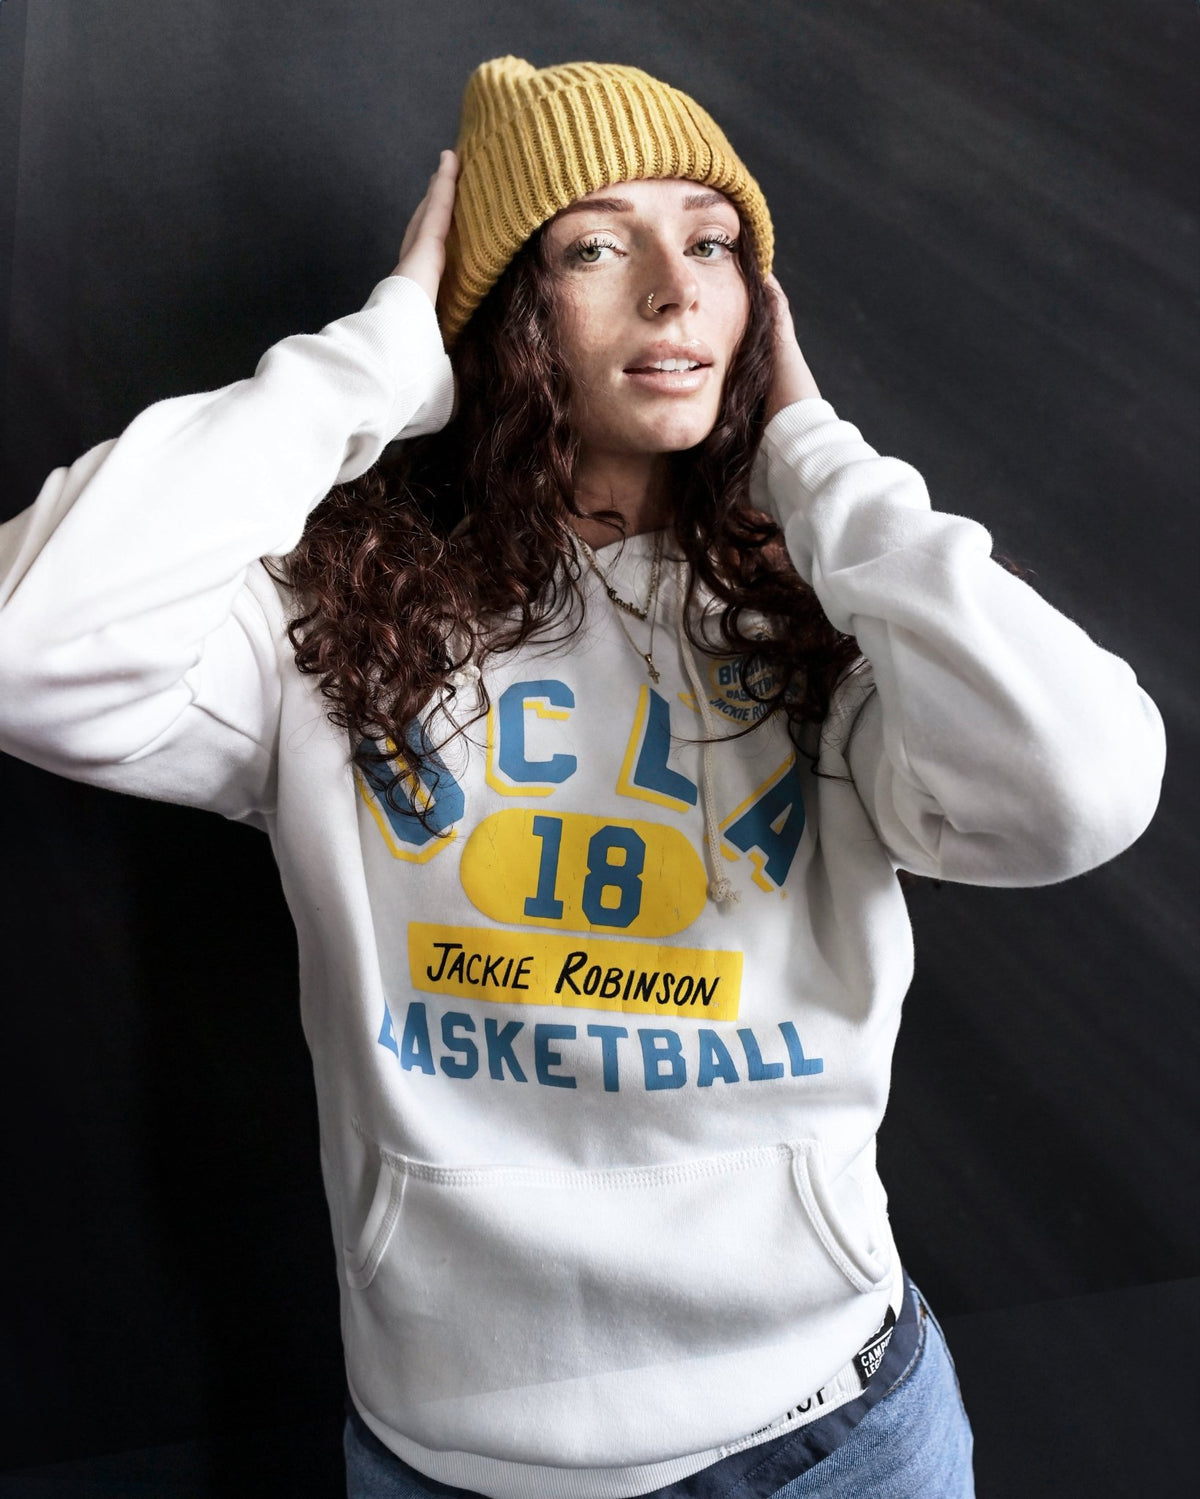 UCLA - Jackie Robinson Basketball Ivory PO Hoody - Roots of Fight